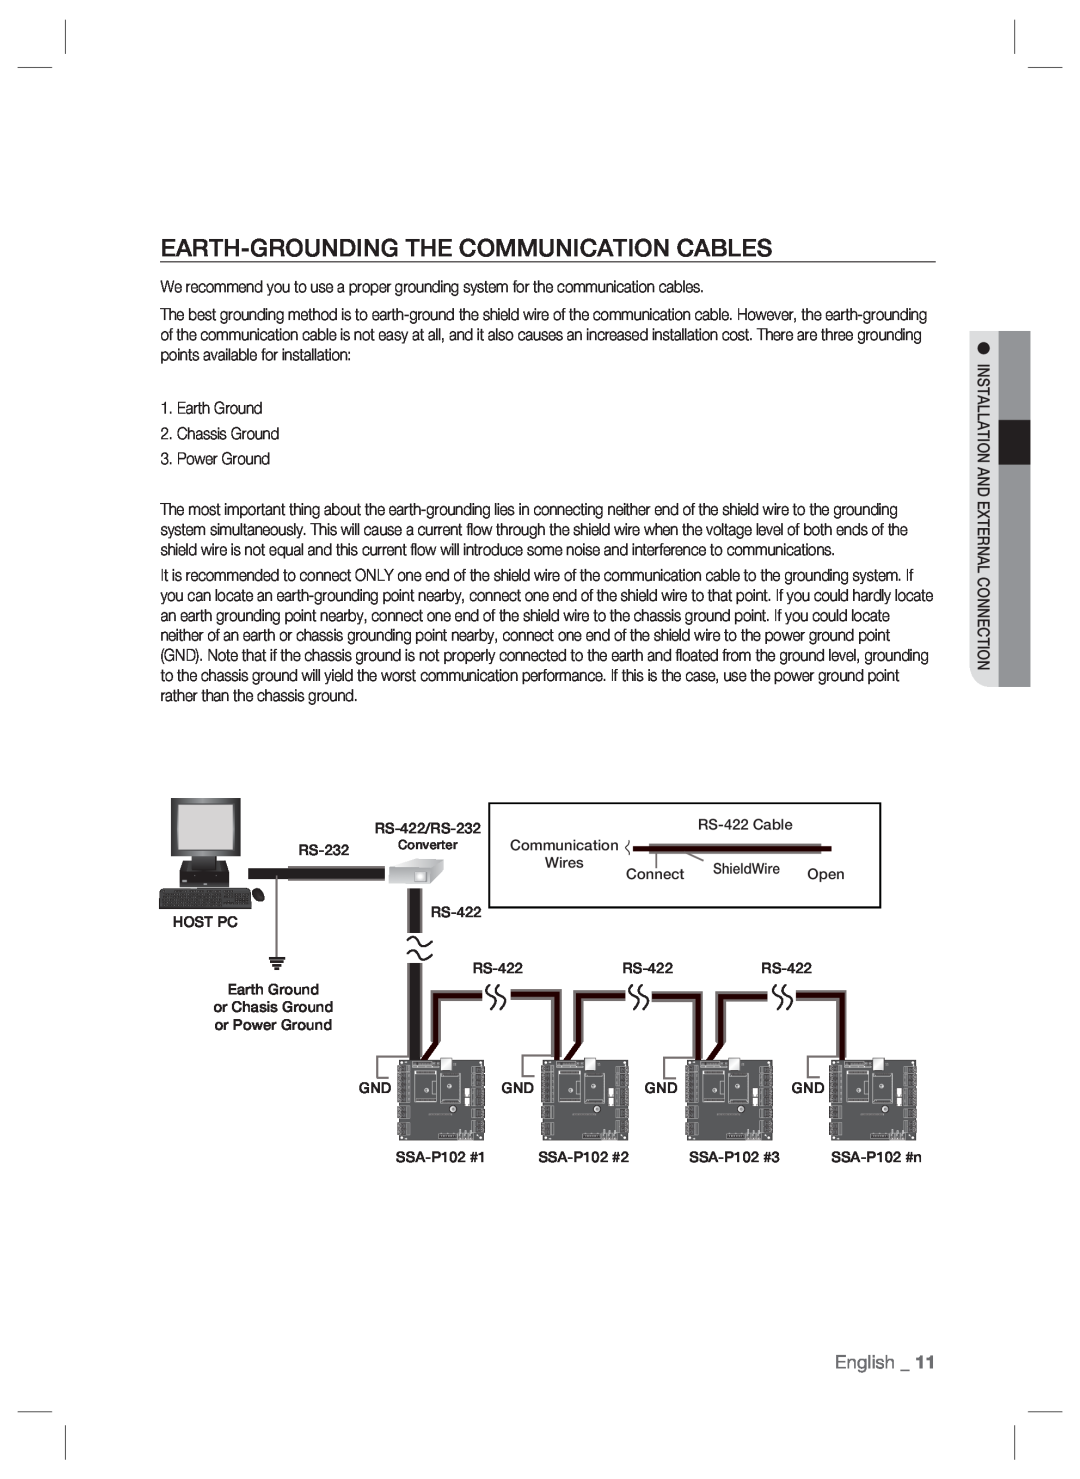 Samsung SSA-P102T user manual Earth-Groundingthe Communication Cables, English 